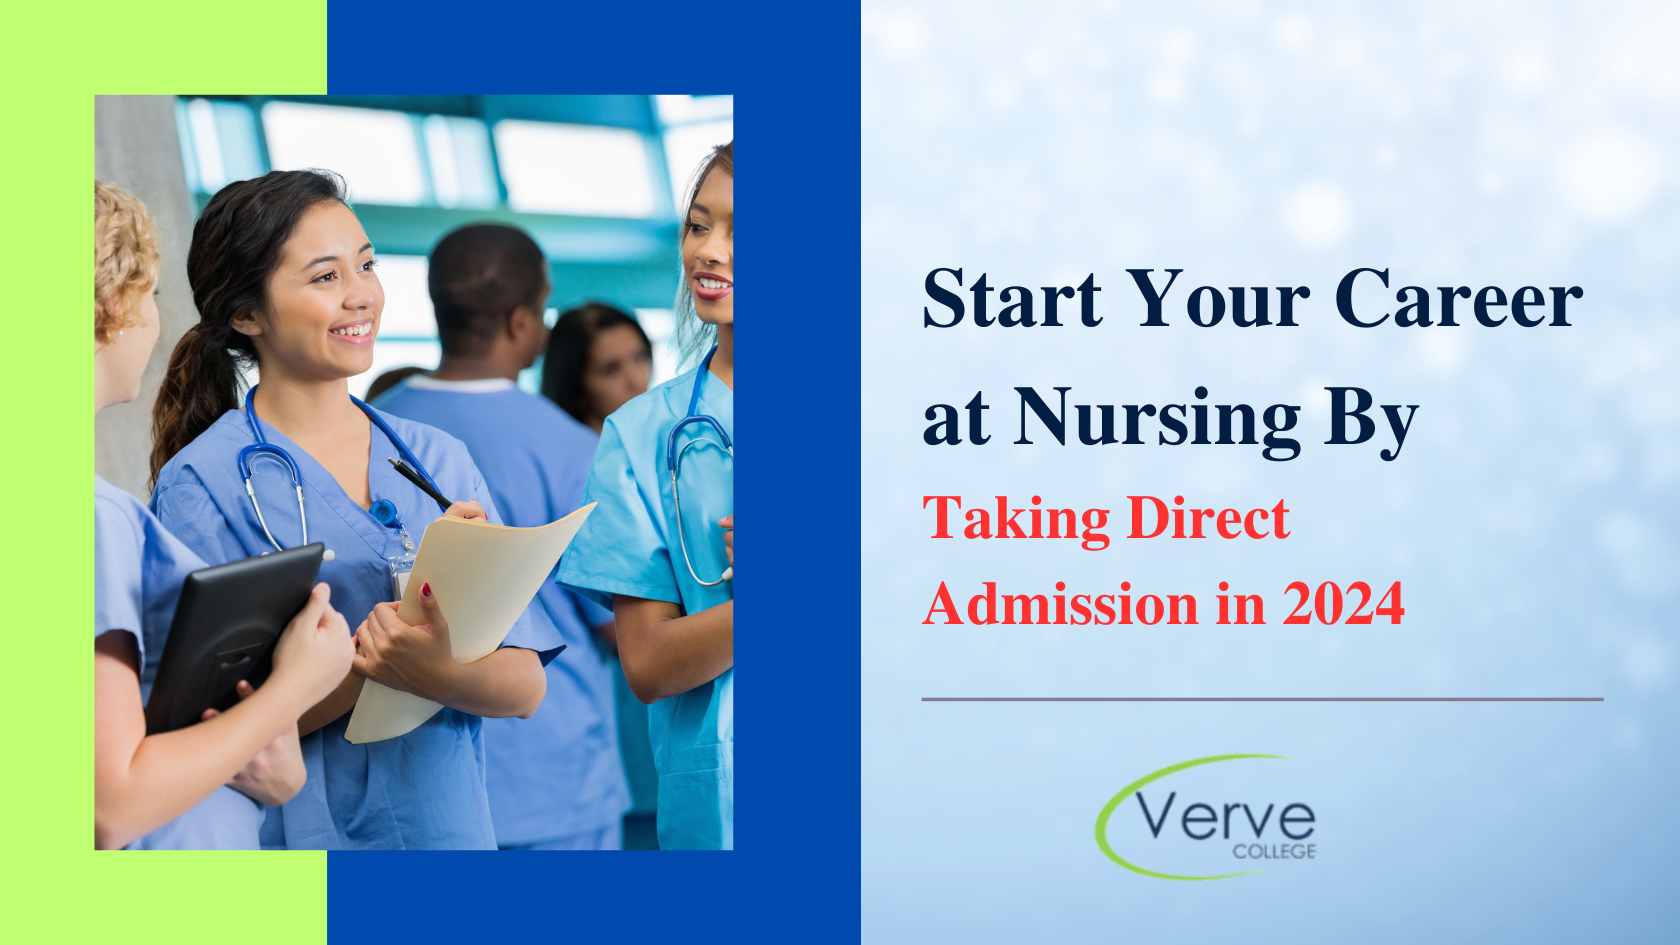 Start Your Career in Nursing By Taking Direct Admission in 2024